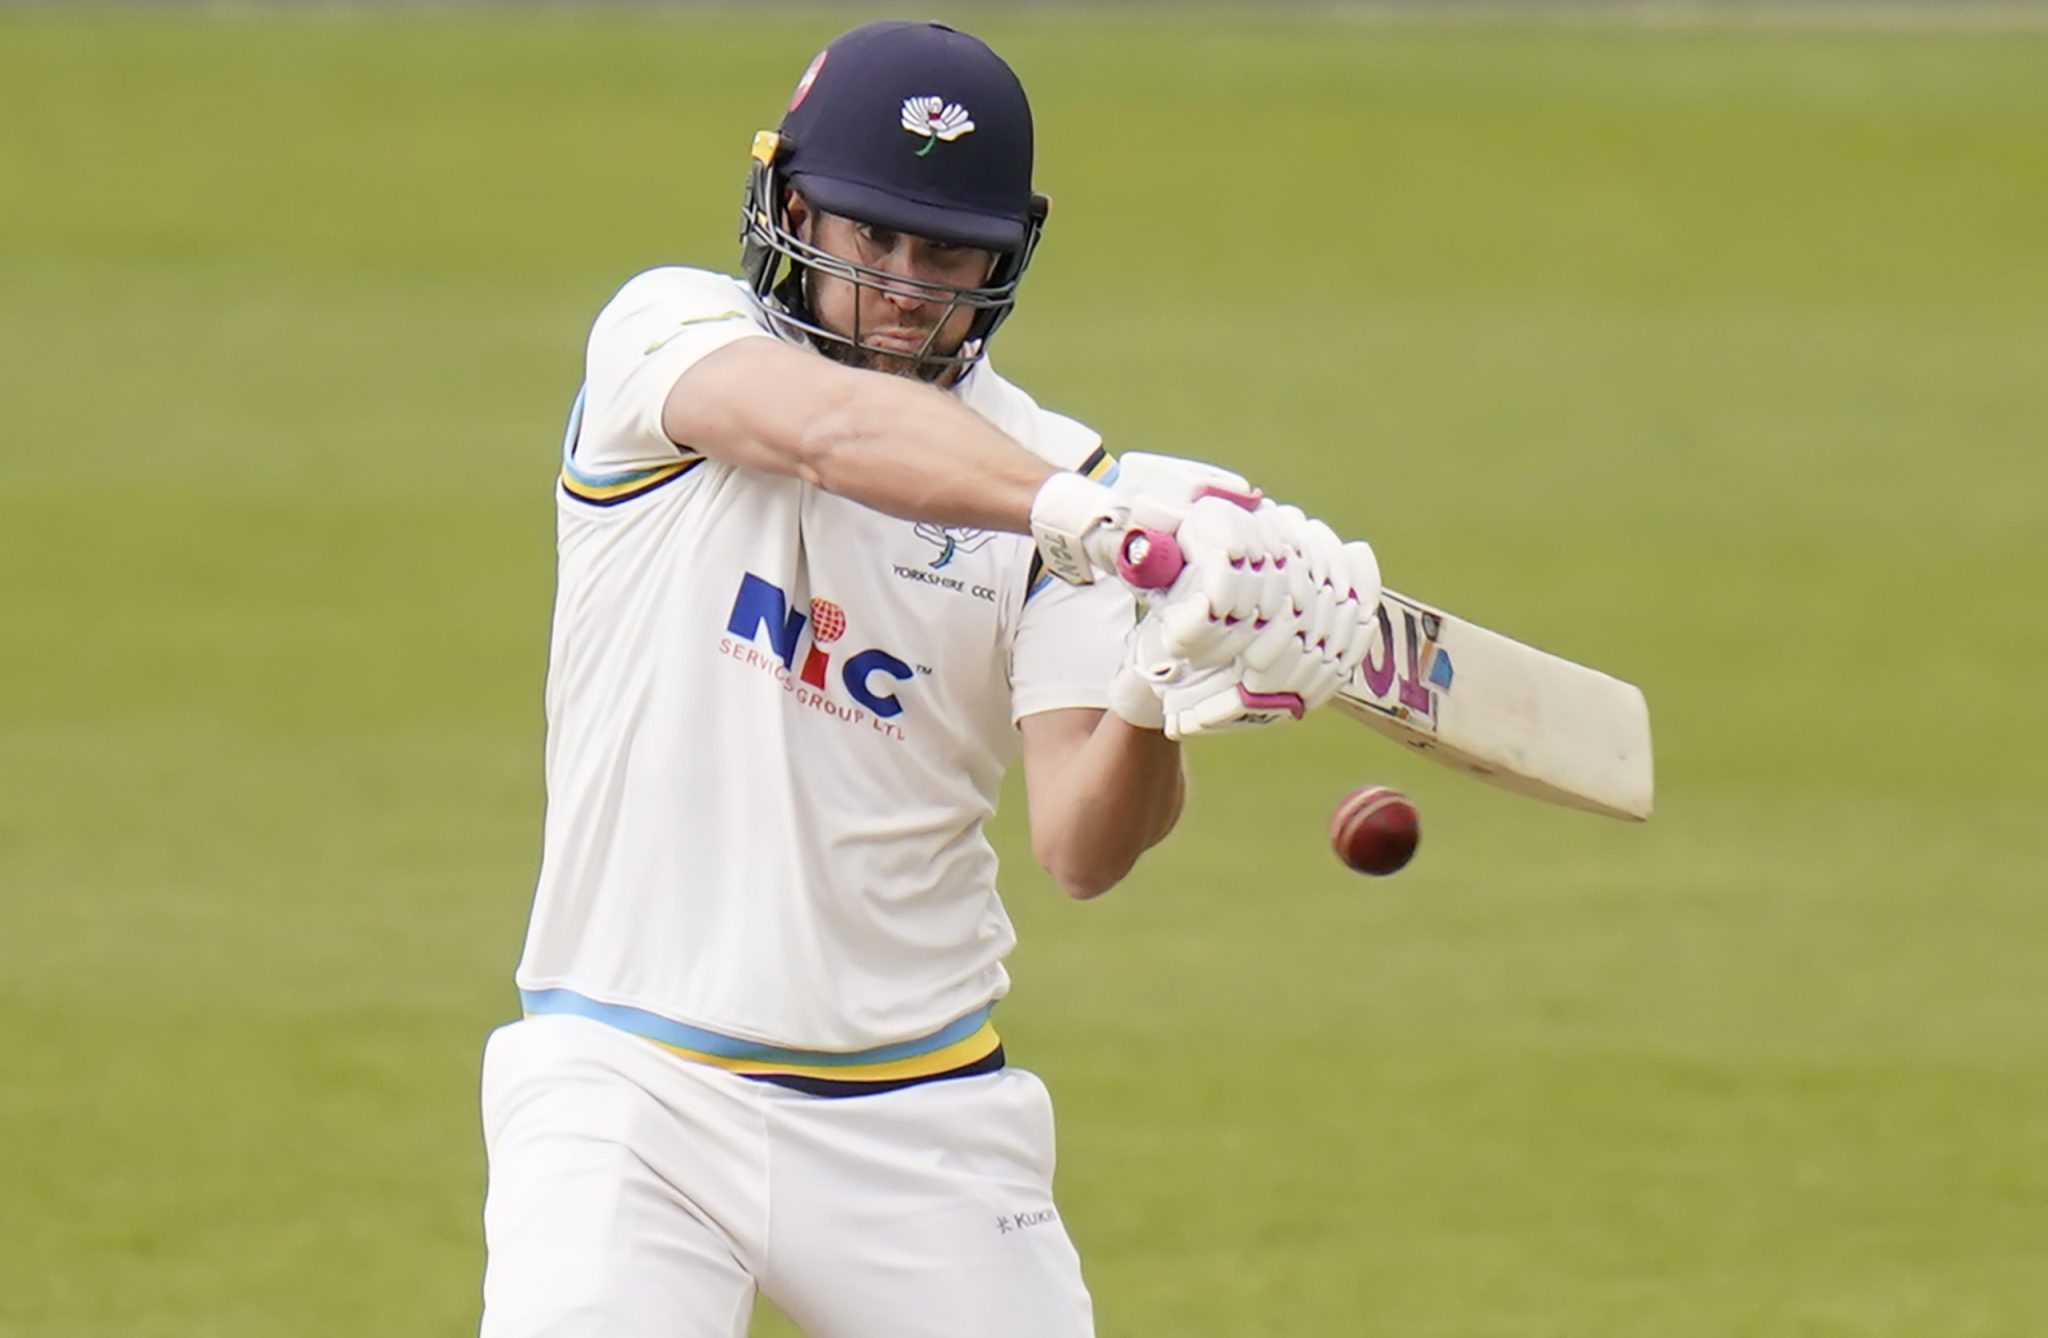 Dawid Malan leads Yorkshire to Roses win as Jos Buttler fails to fire Lancashire